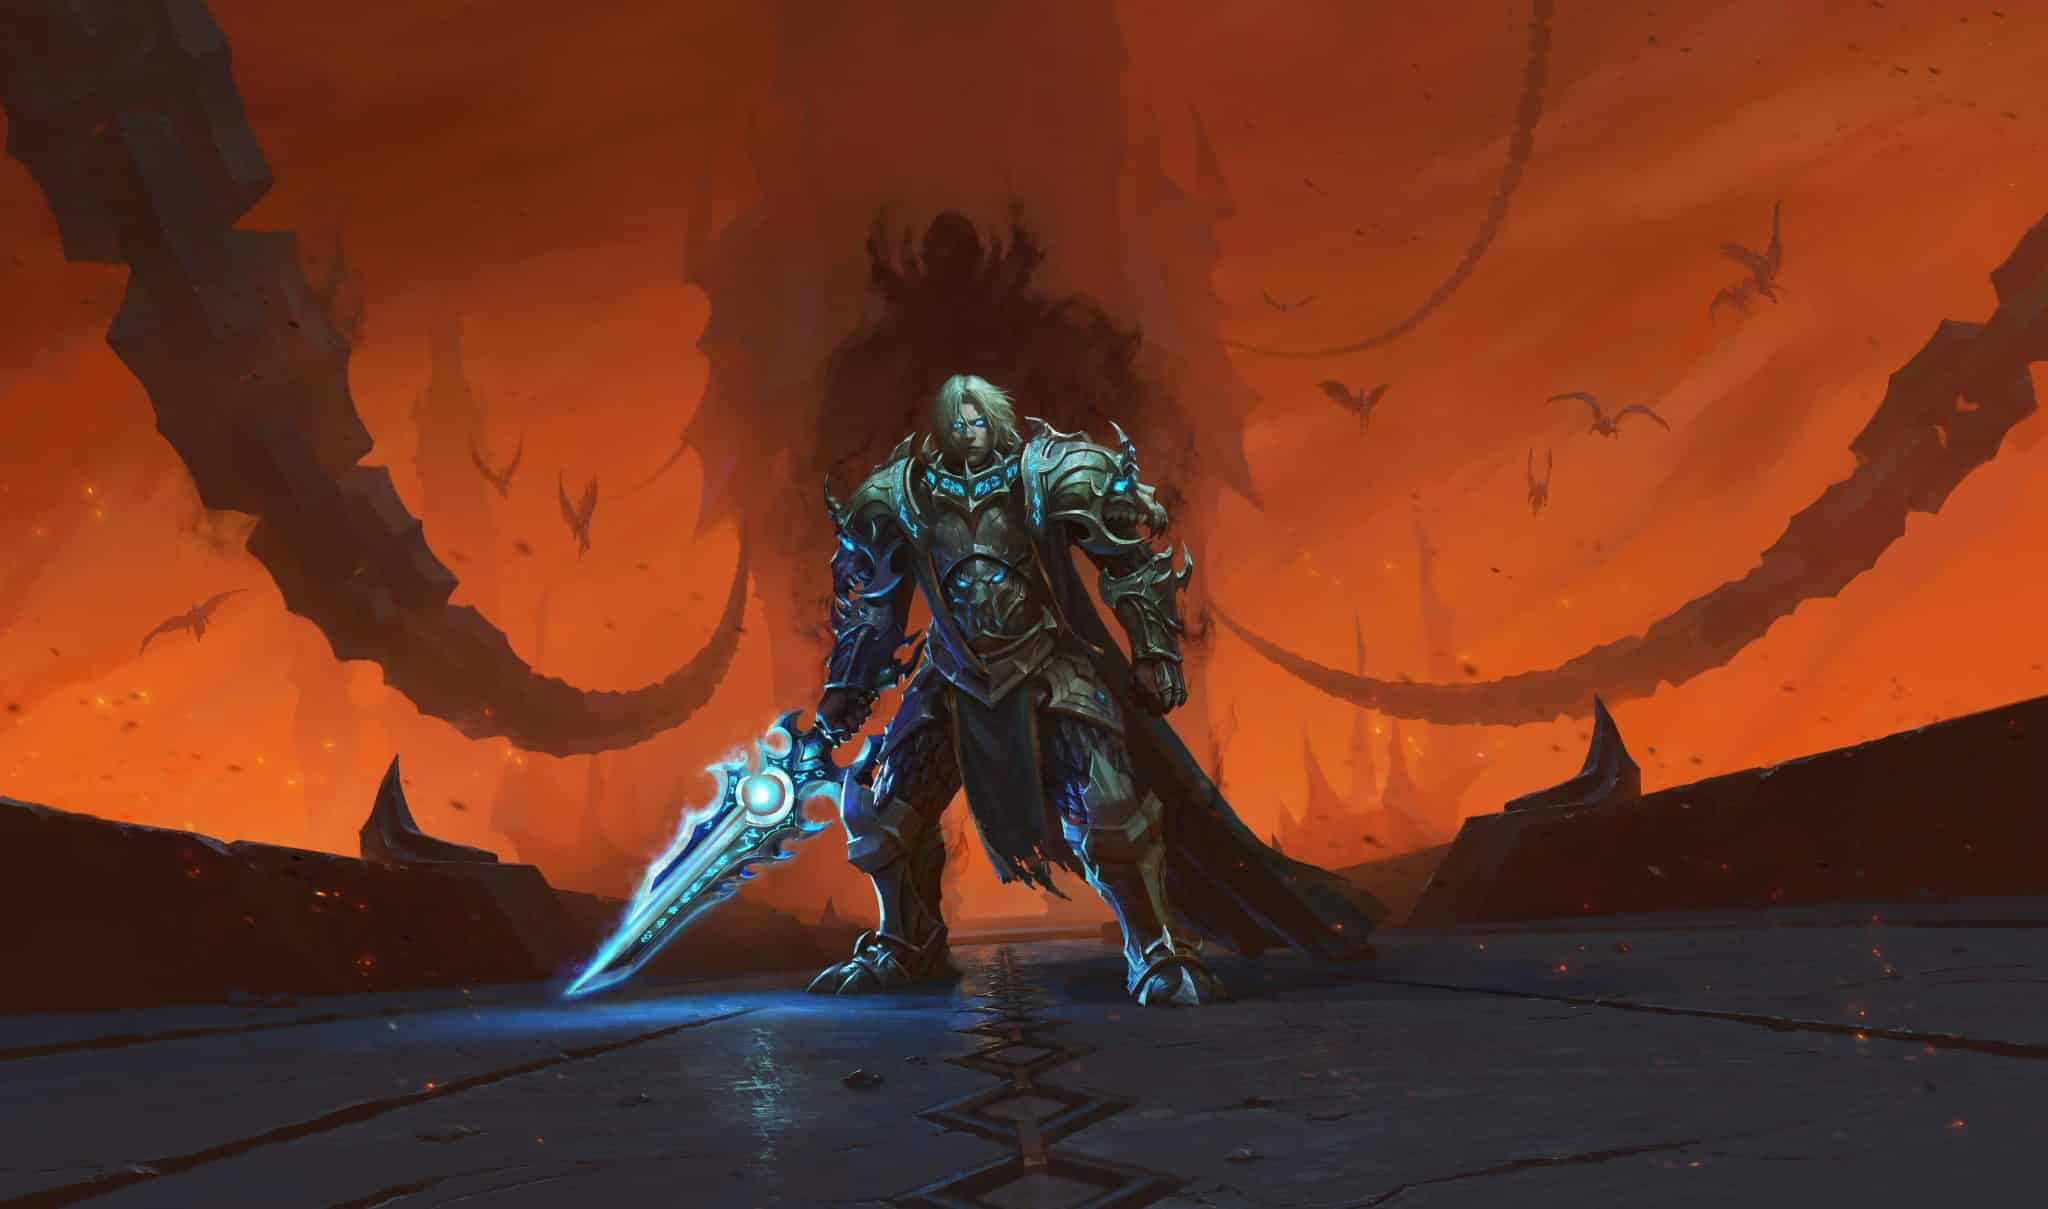 WoW knight in black and blue armor stands in front of chains with the shadow of a man behind him